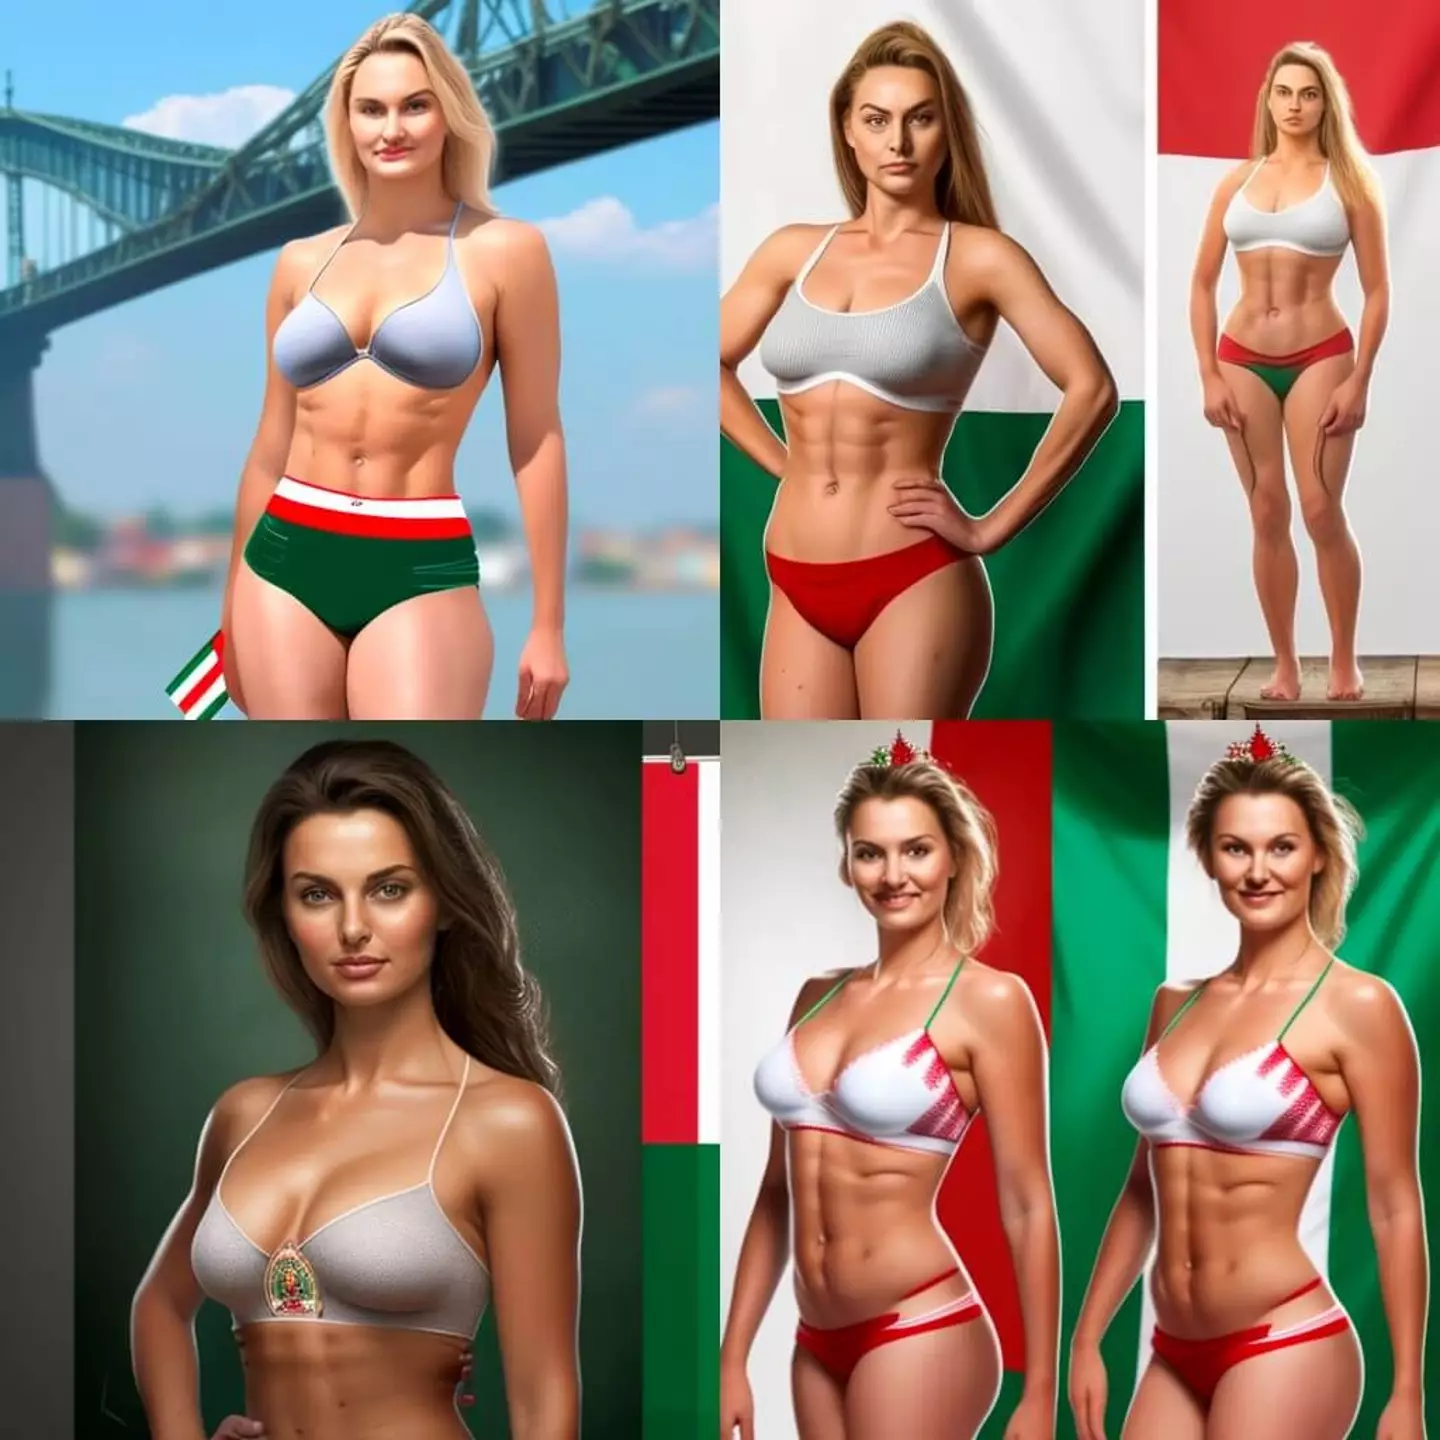 The ideal Hungarian woman has a six pack according to the AI.